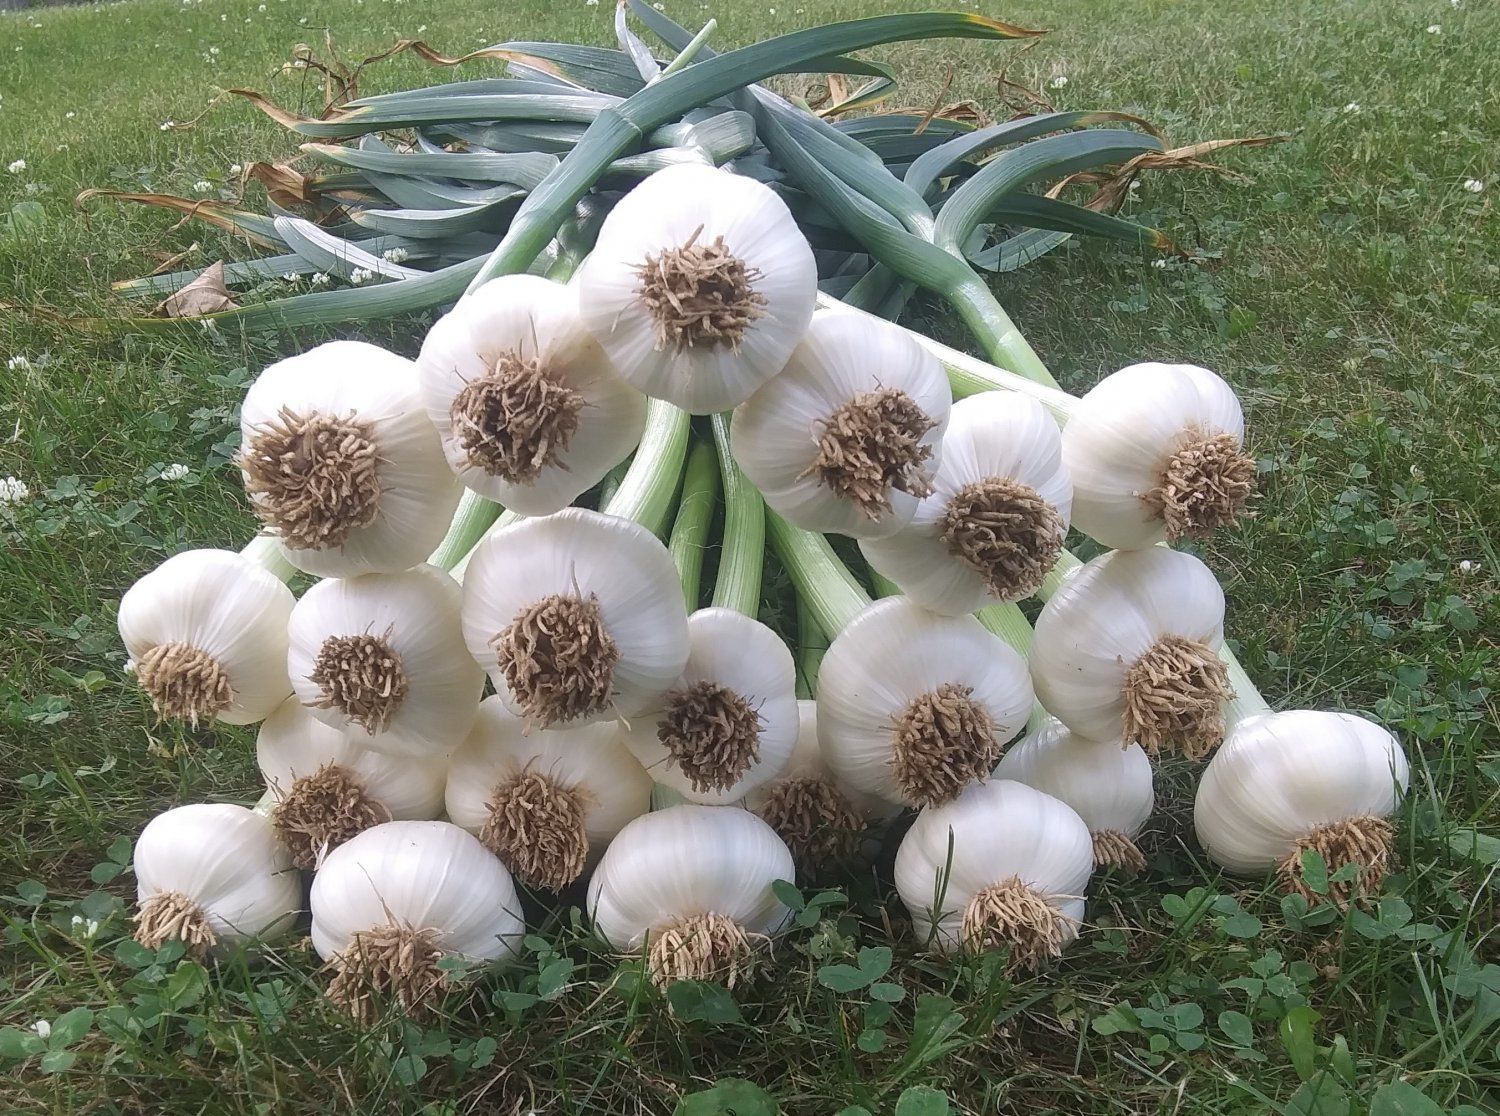 Previous Happening: It's Fresh Garlic Time!